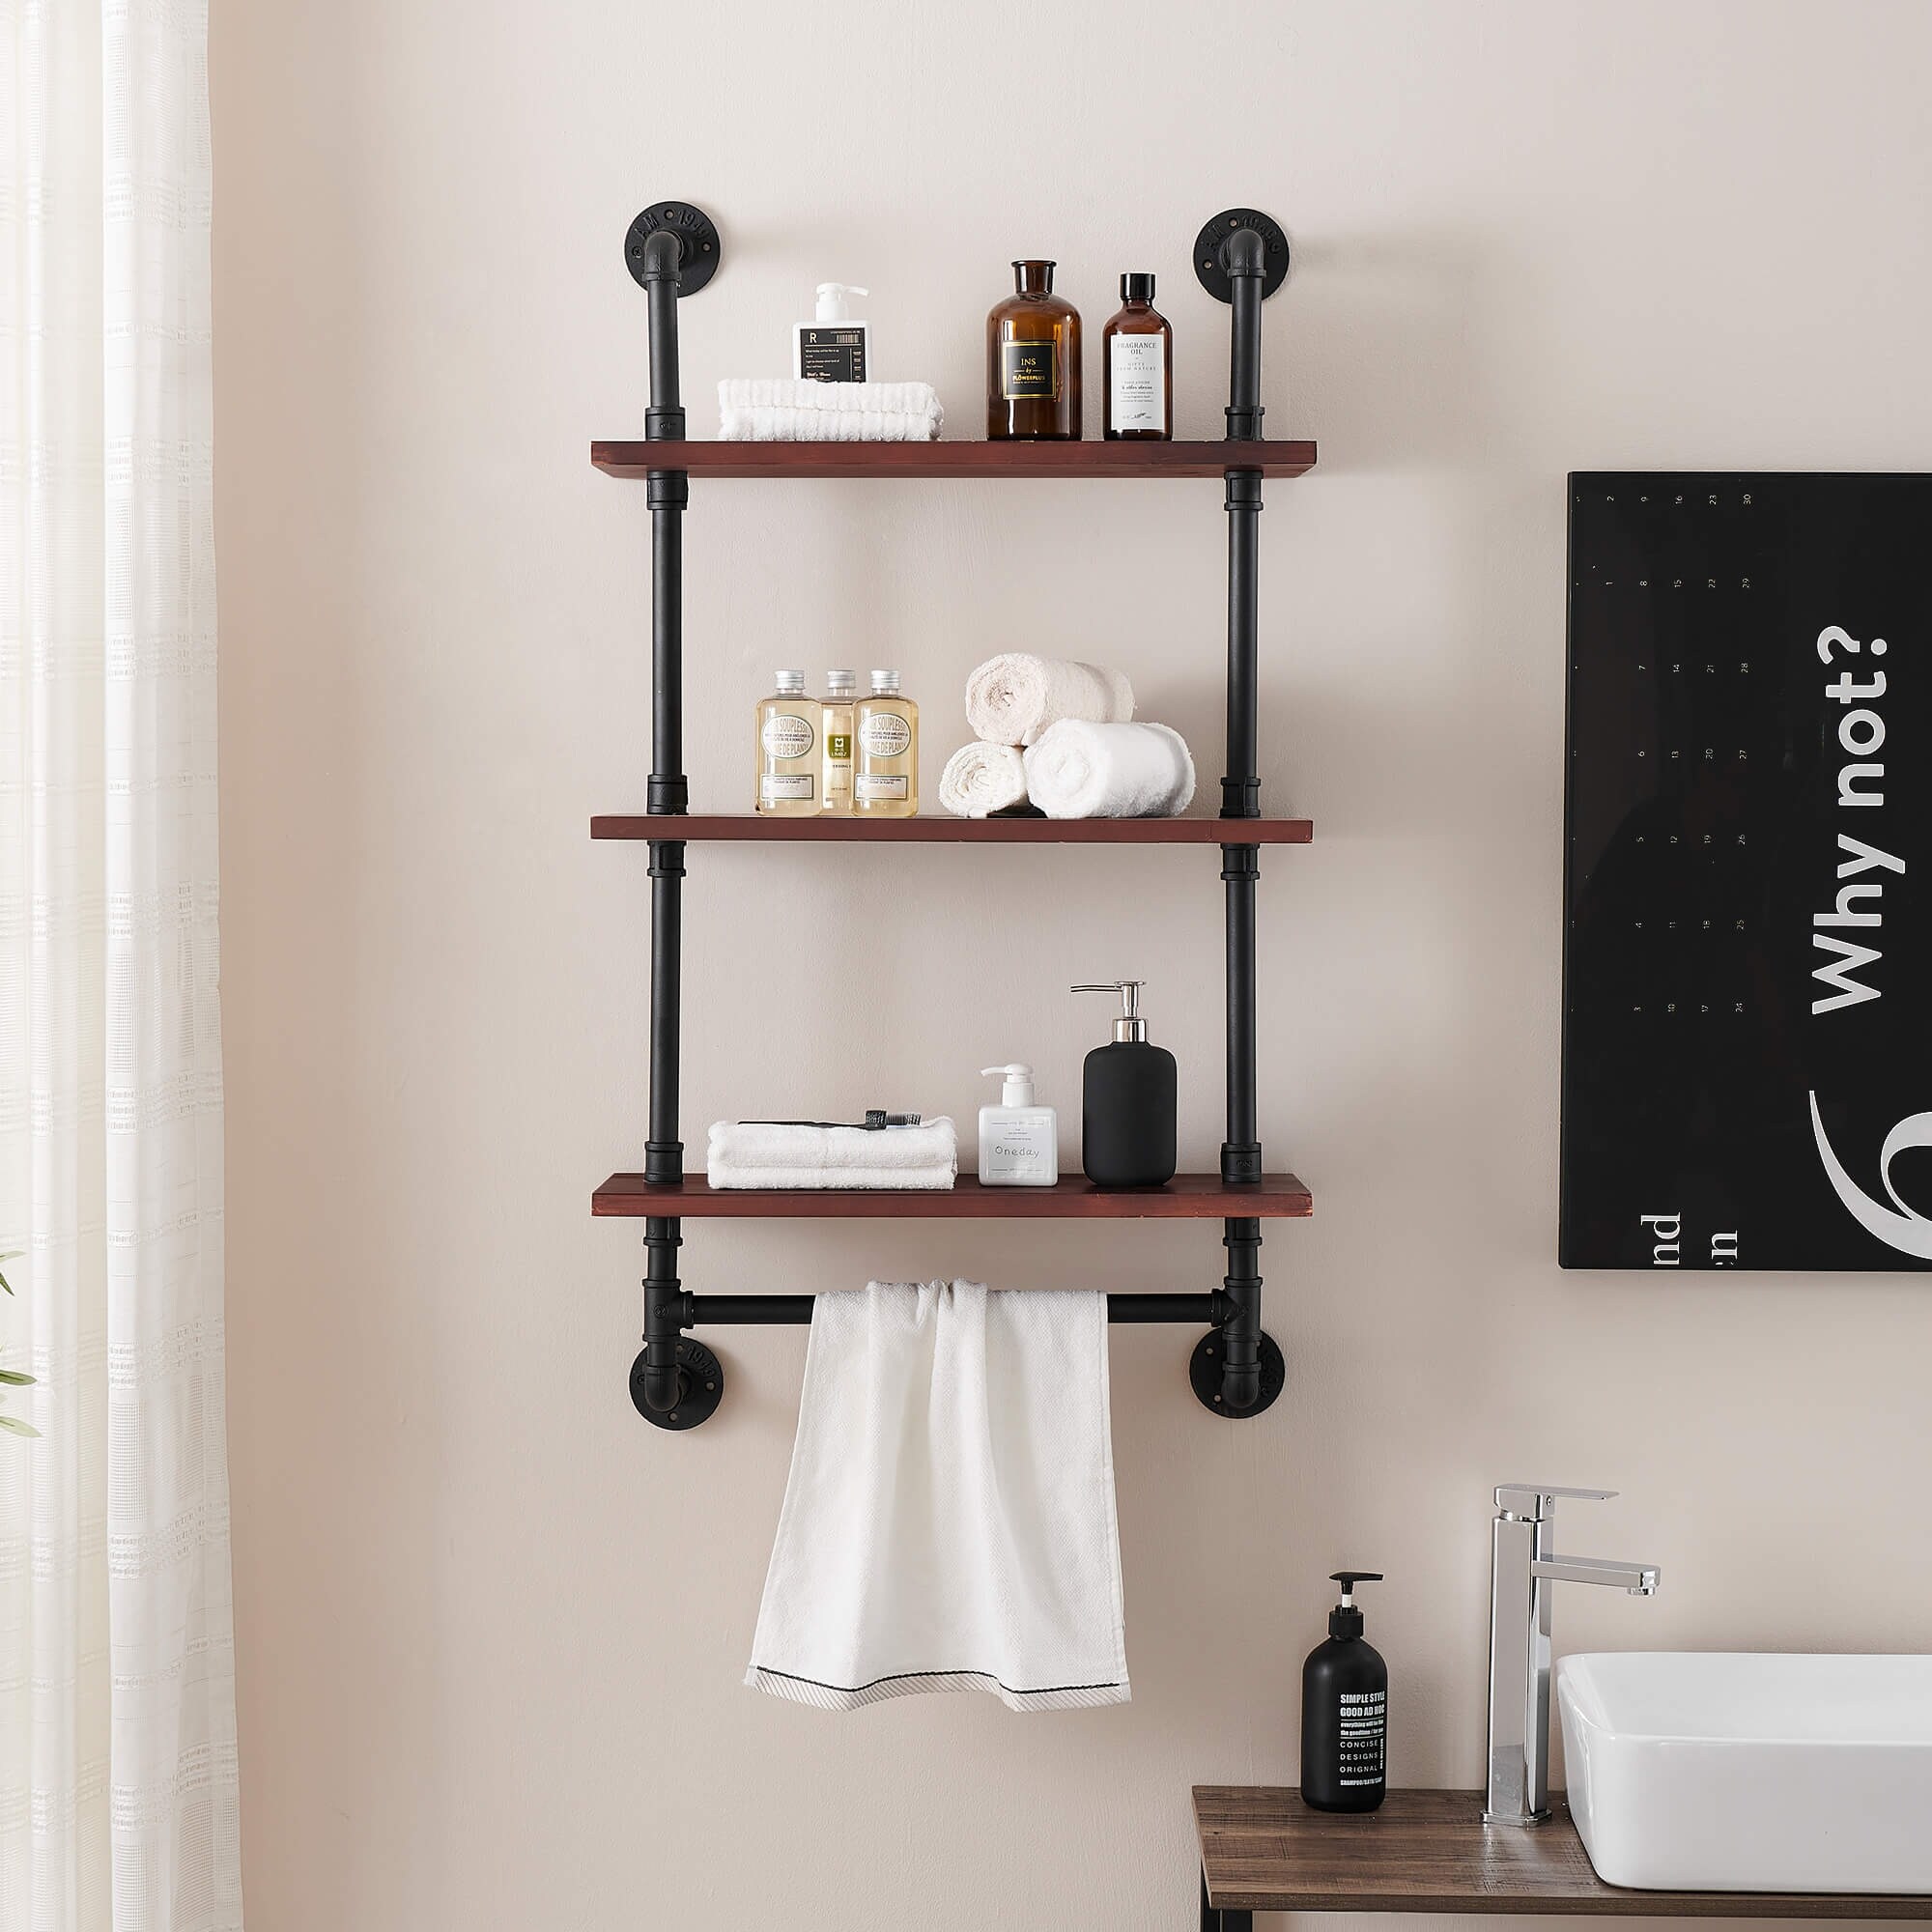 https://ak1.ostkcdn.com/images/products/is/images/direct/81c45ef9be8e36b991cfaae0c7a7dfbf7cac67ee/Industrial-Pipe-Shelving%2C-3-Tier-Iron-Pipe-Shelves-Industrial-Bathroom-Shelves.jpg